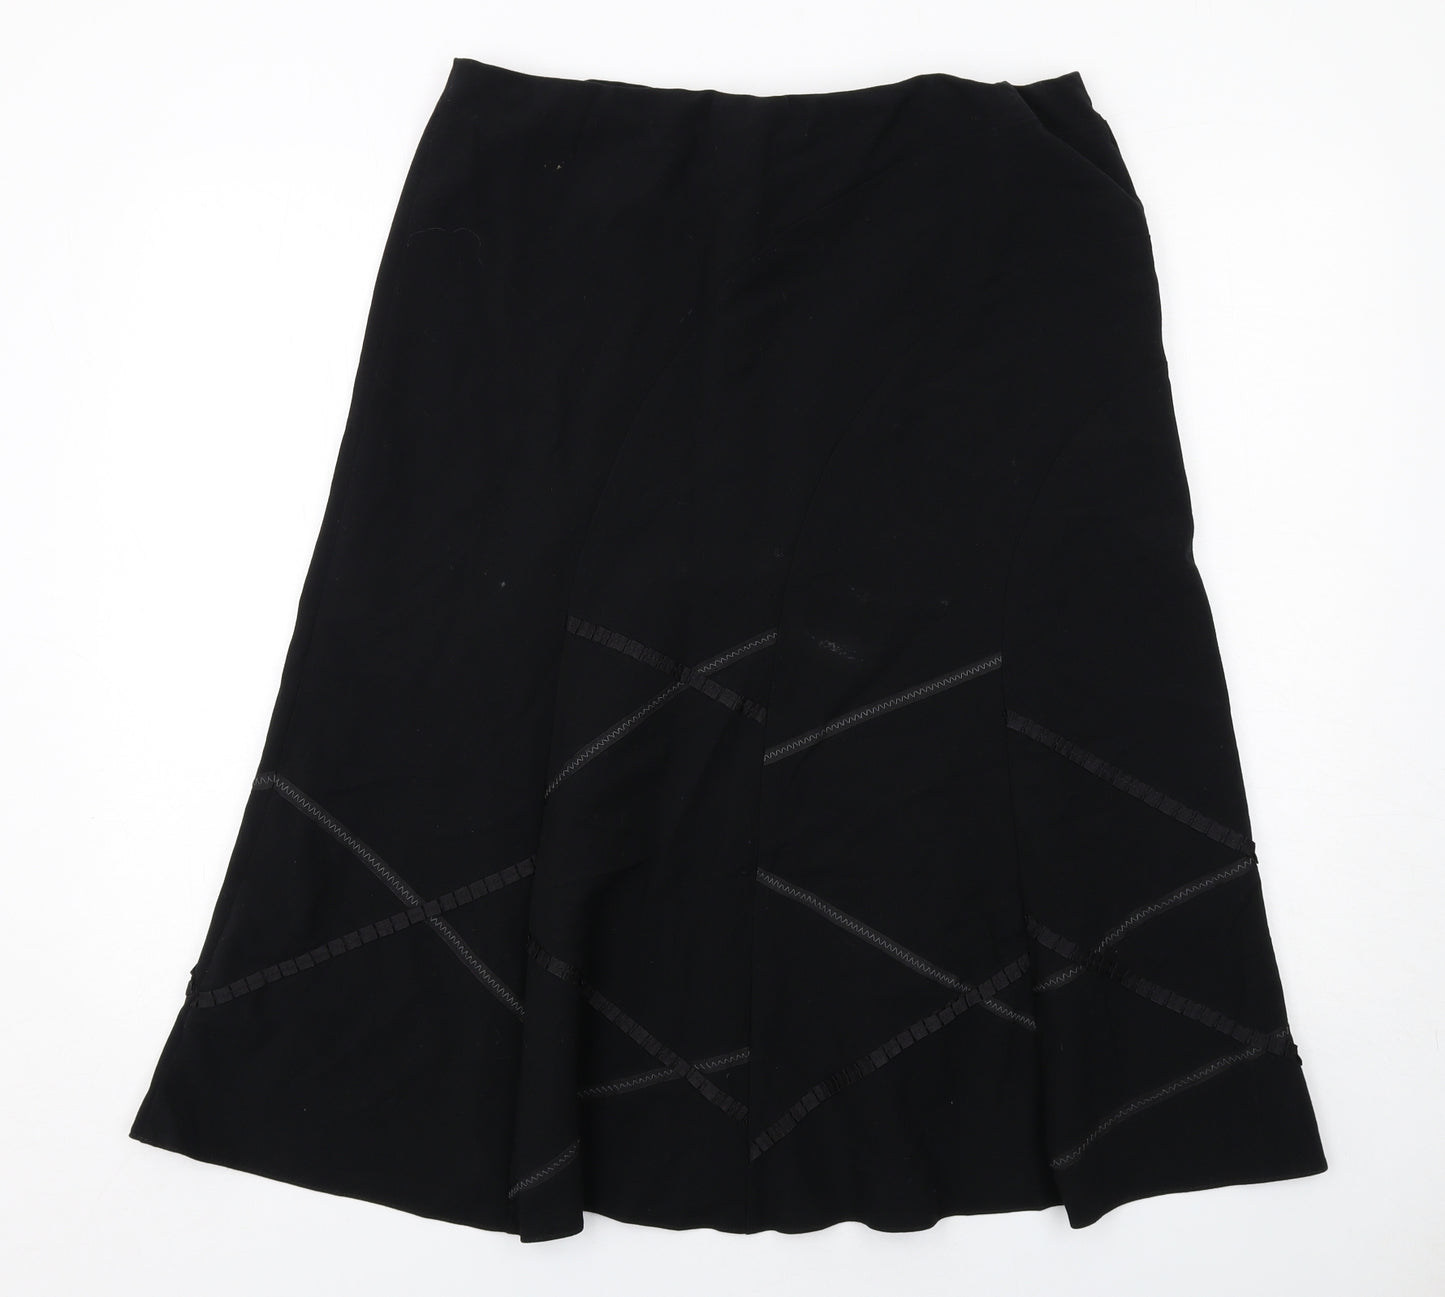 Marks and Spencer Womens Black Polyester A-Line Skirt Size 16